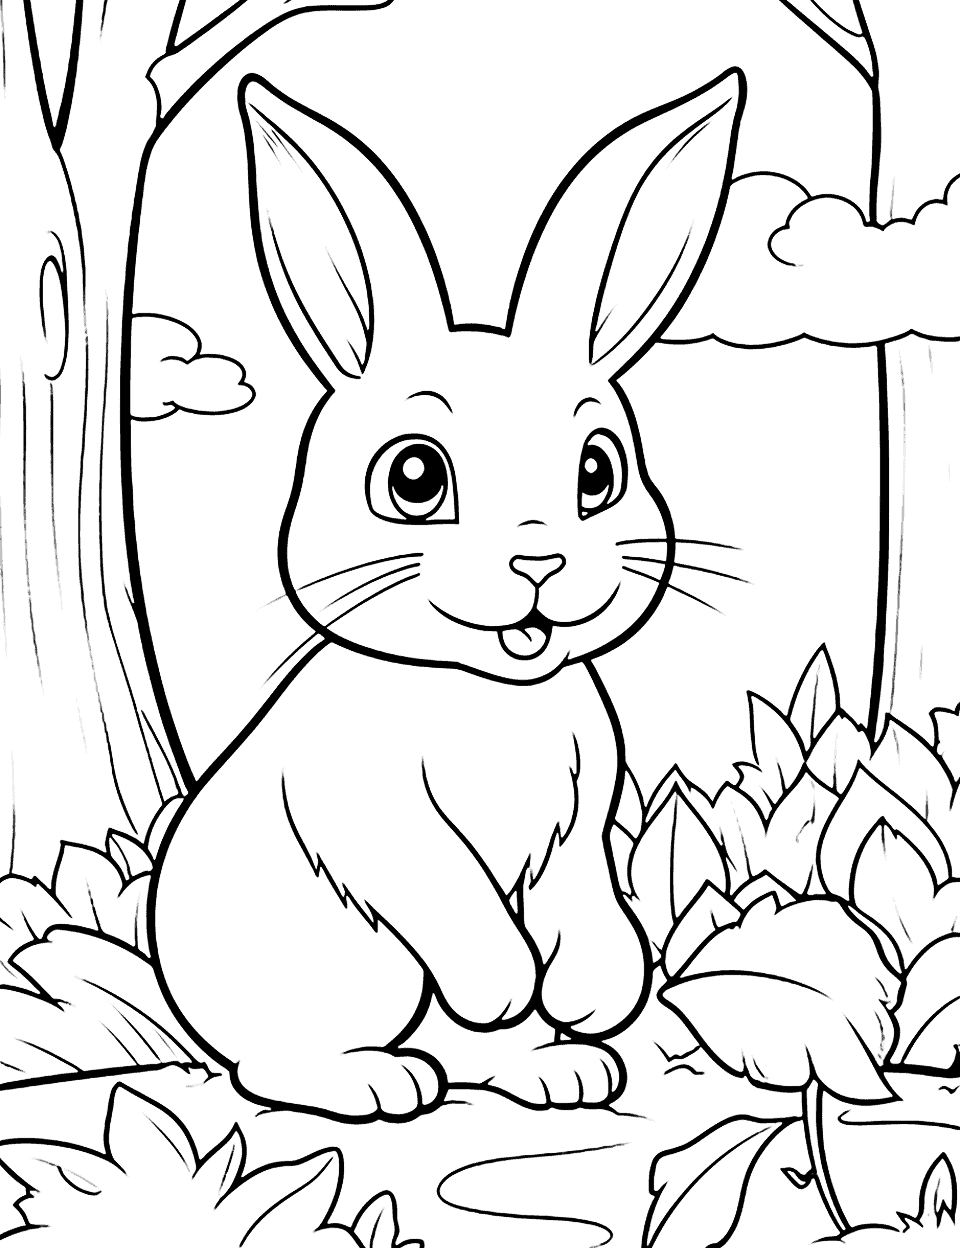 Bunny and the Fall Leaves Coloring Page - A scene of our bunny playing amidst the fall foliage, leaves of orange, red, and yellow.